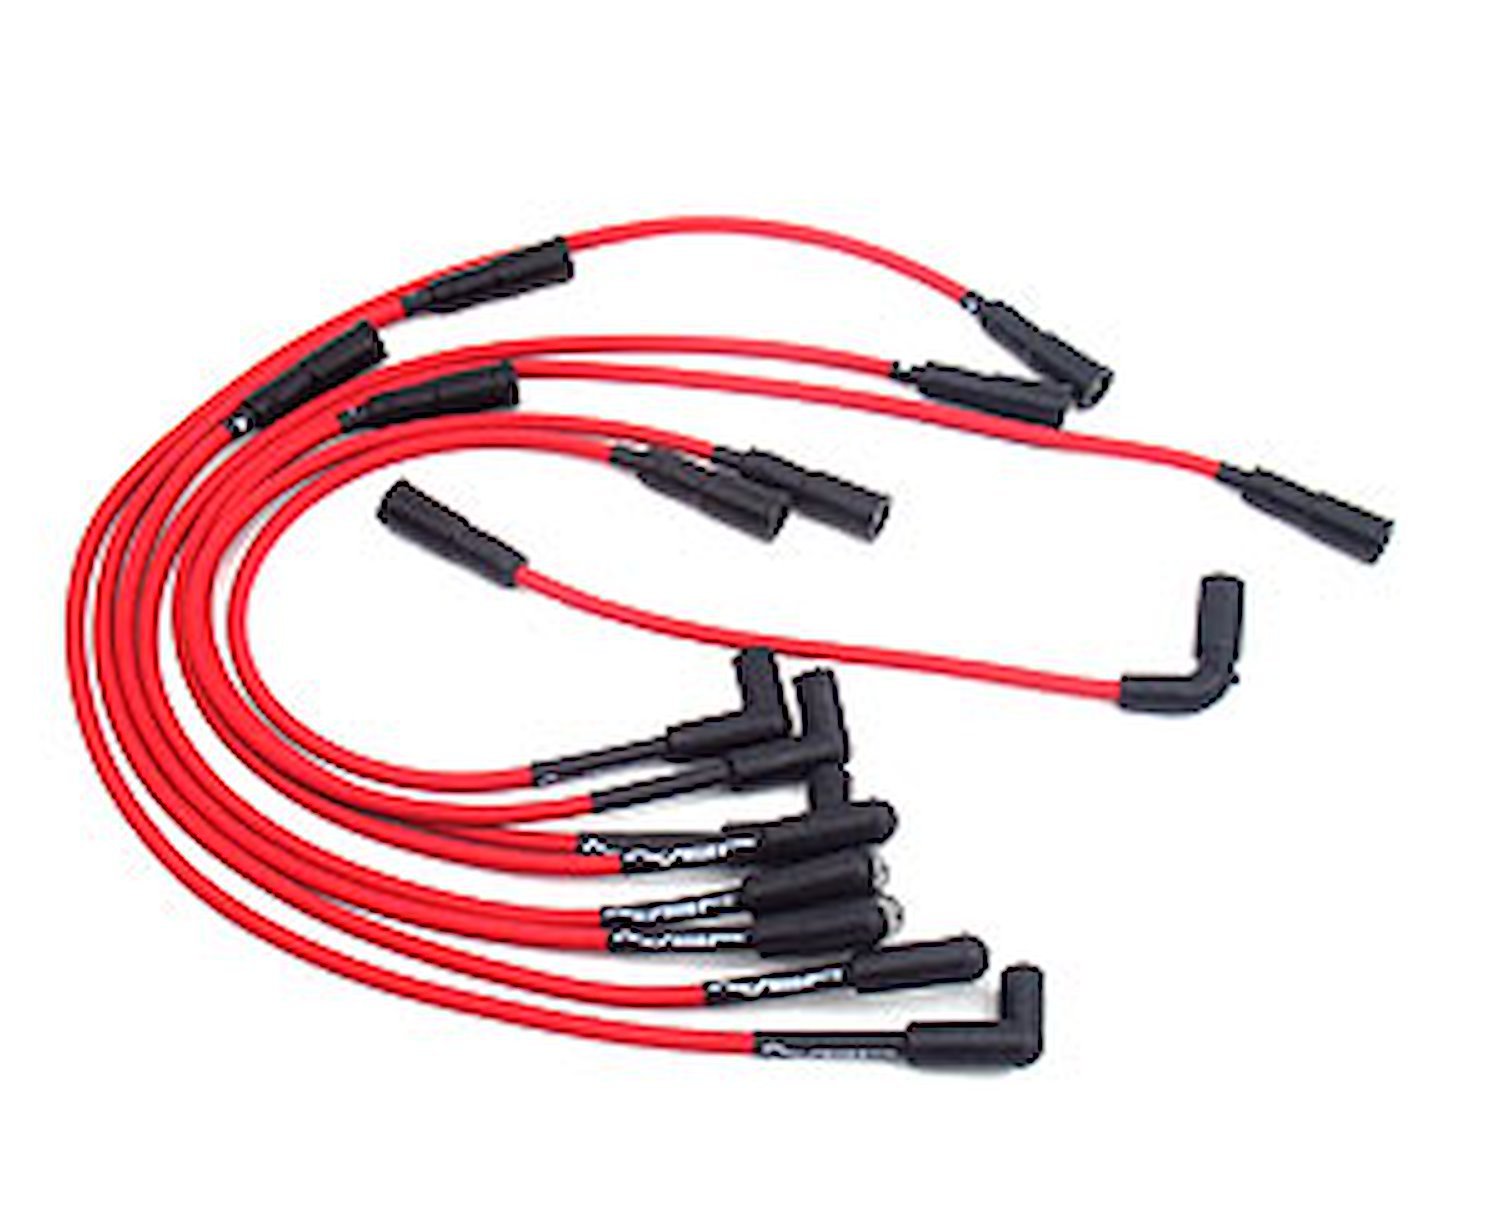 PowerCables Ignition Wires 1993-97 Camaro 5.7L LT1